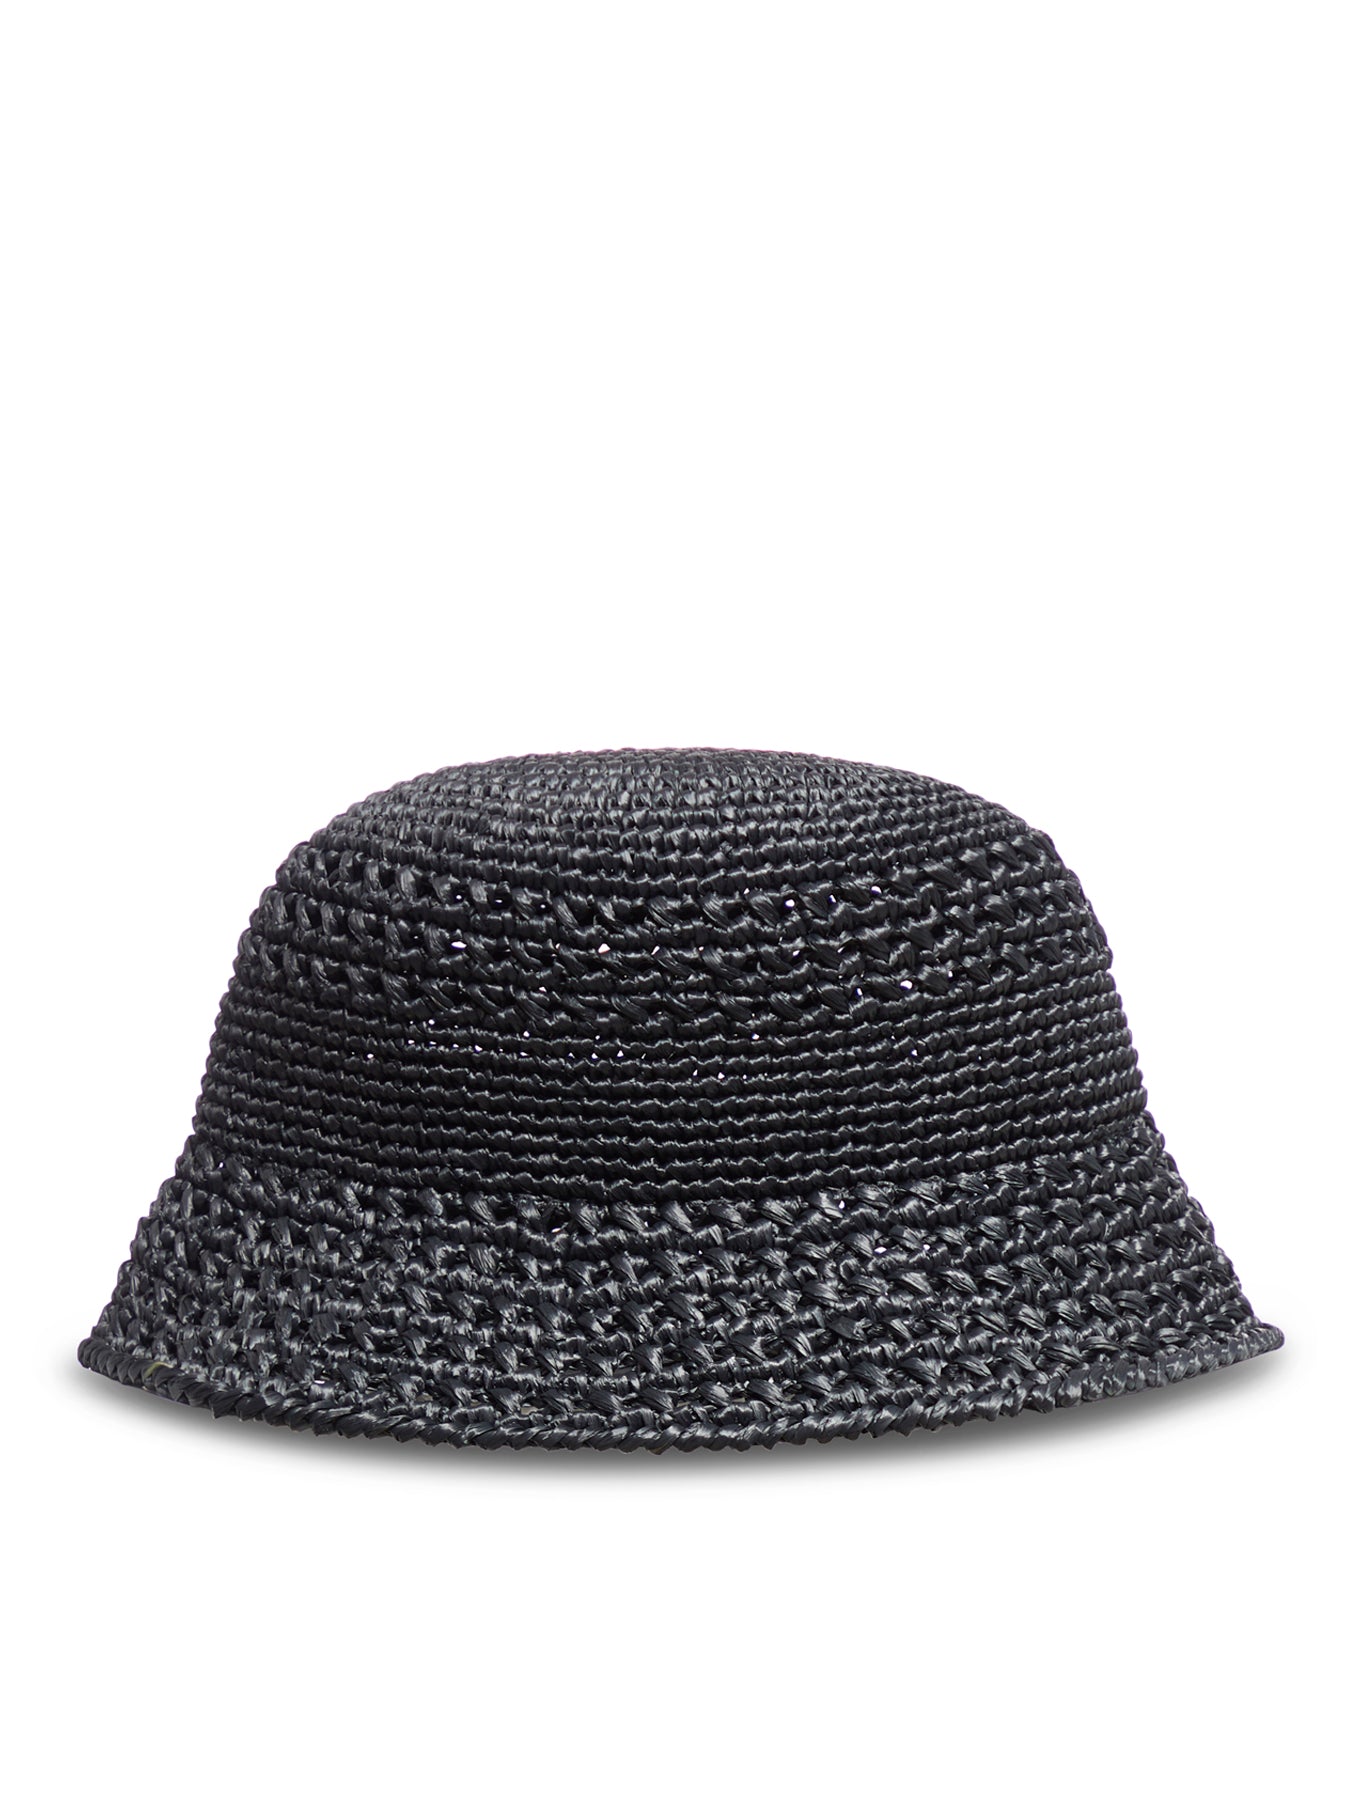 woven fabric hat